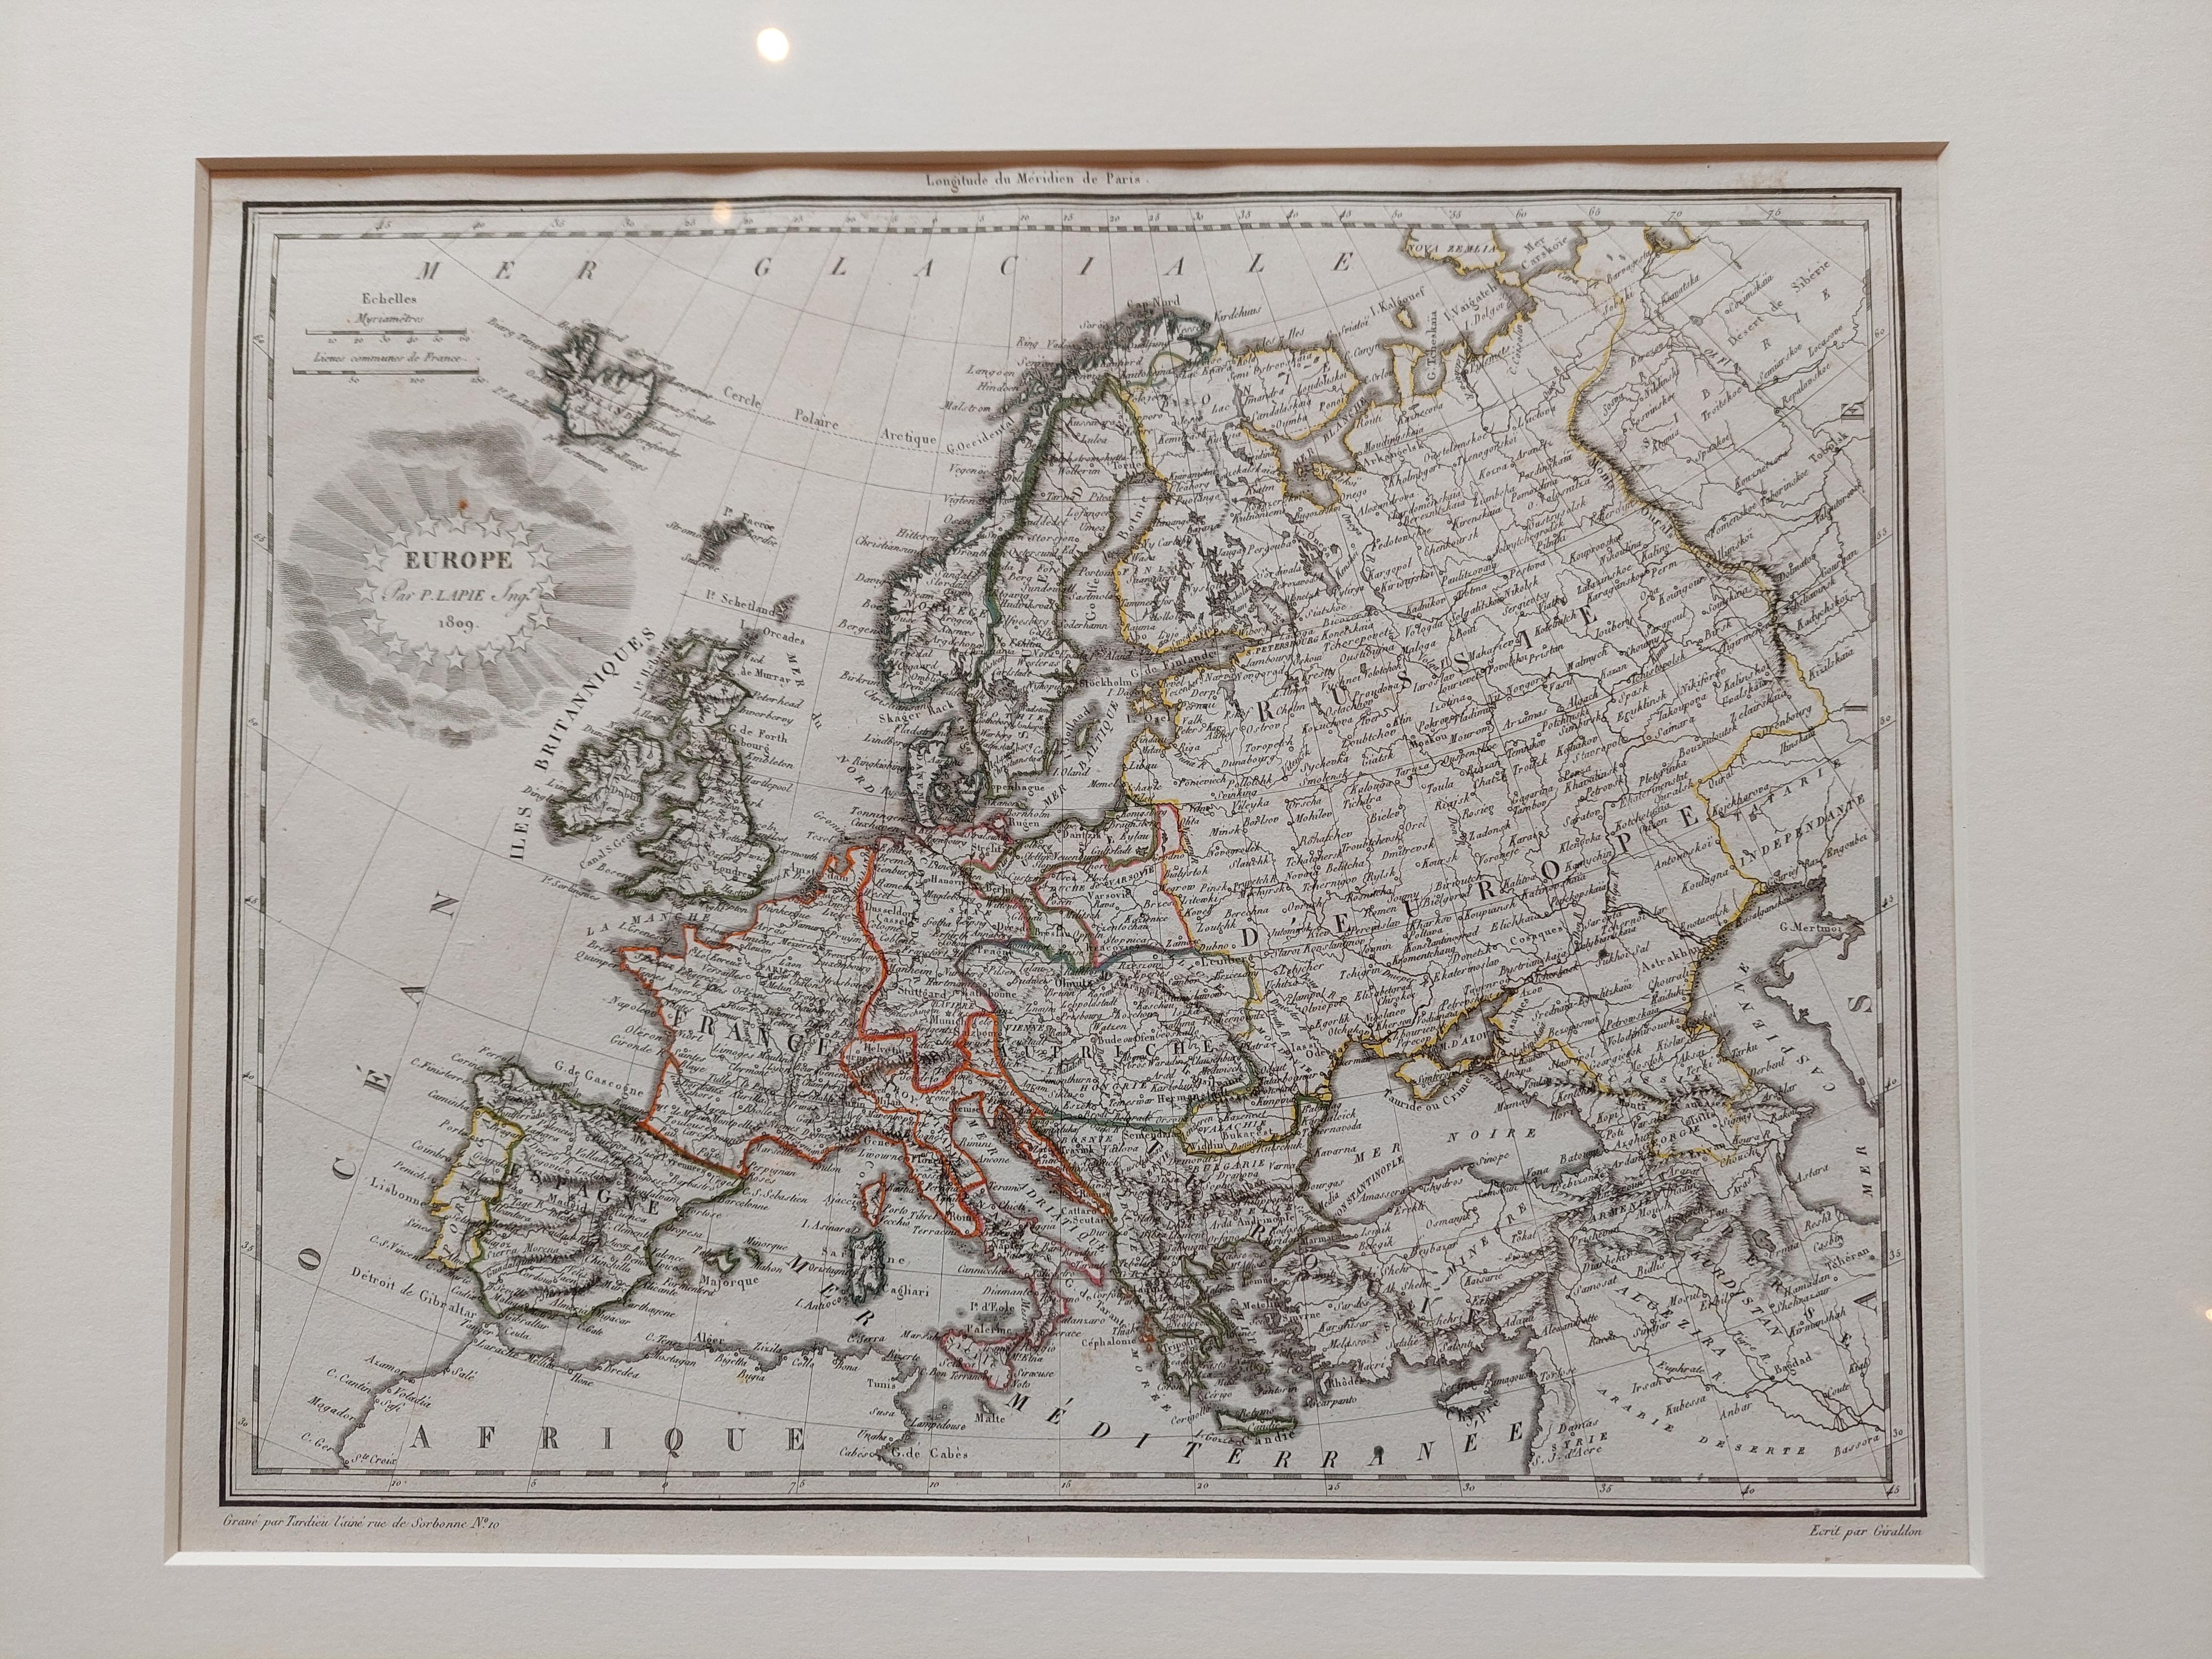 Antique map titled 'Europe'. Original antique map of Europe by P. Lapie, published 1809. Frame included.